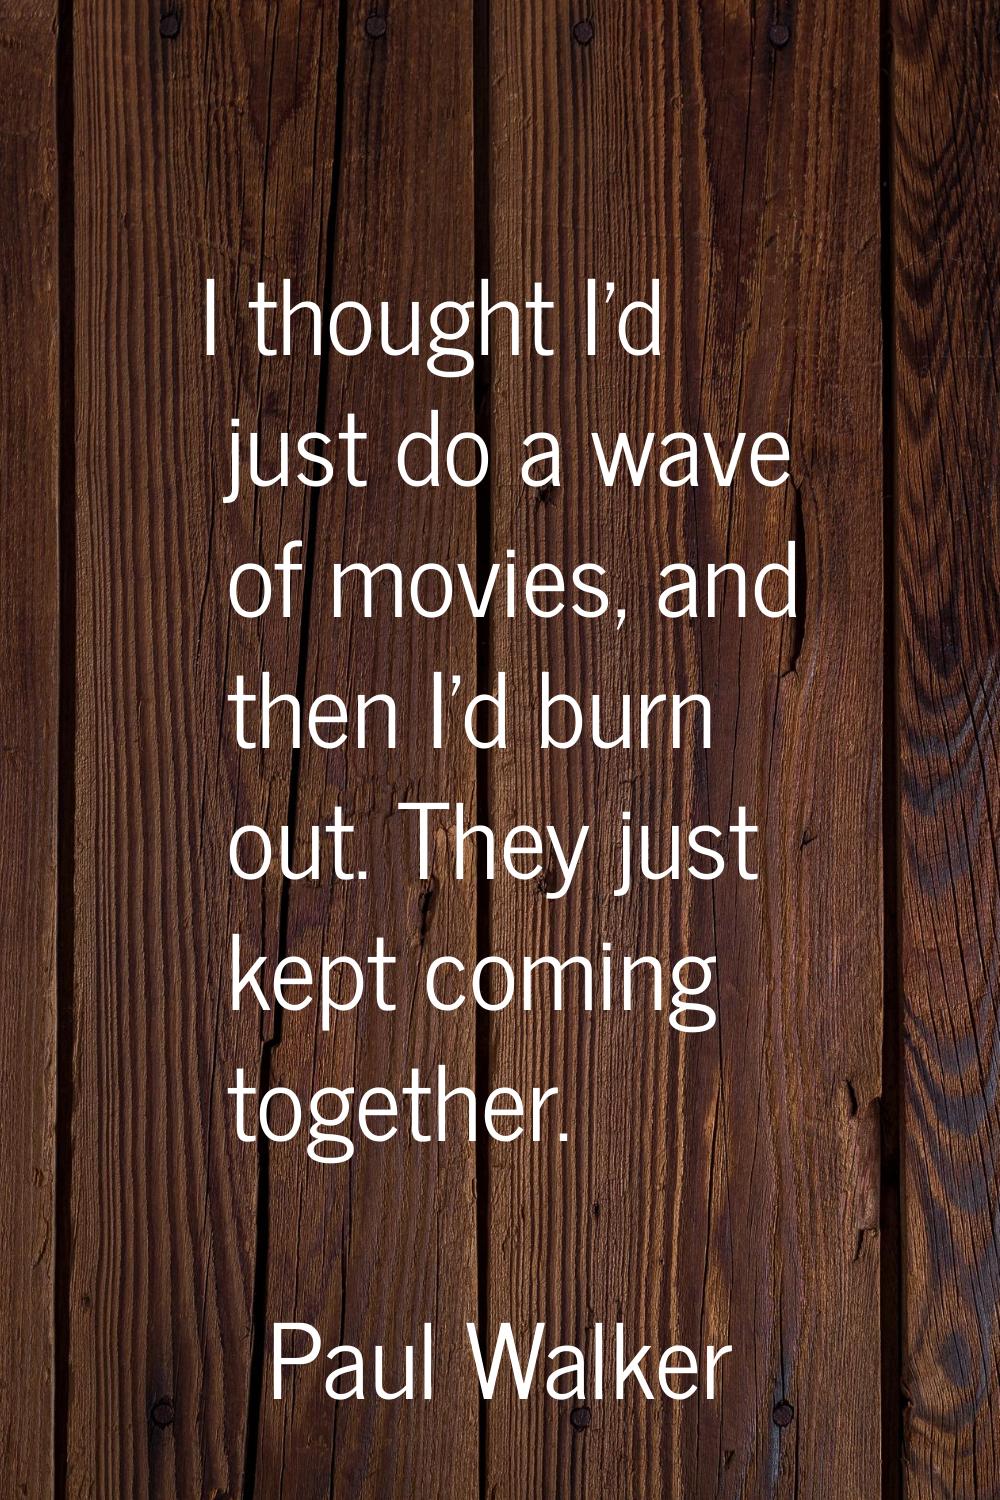 I thought I'd just do a wave of movies, and then I'd burn out. They just kept coming together.